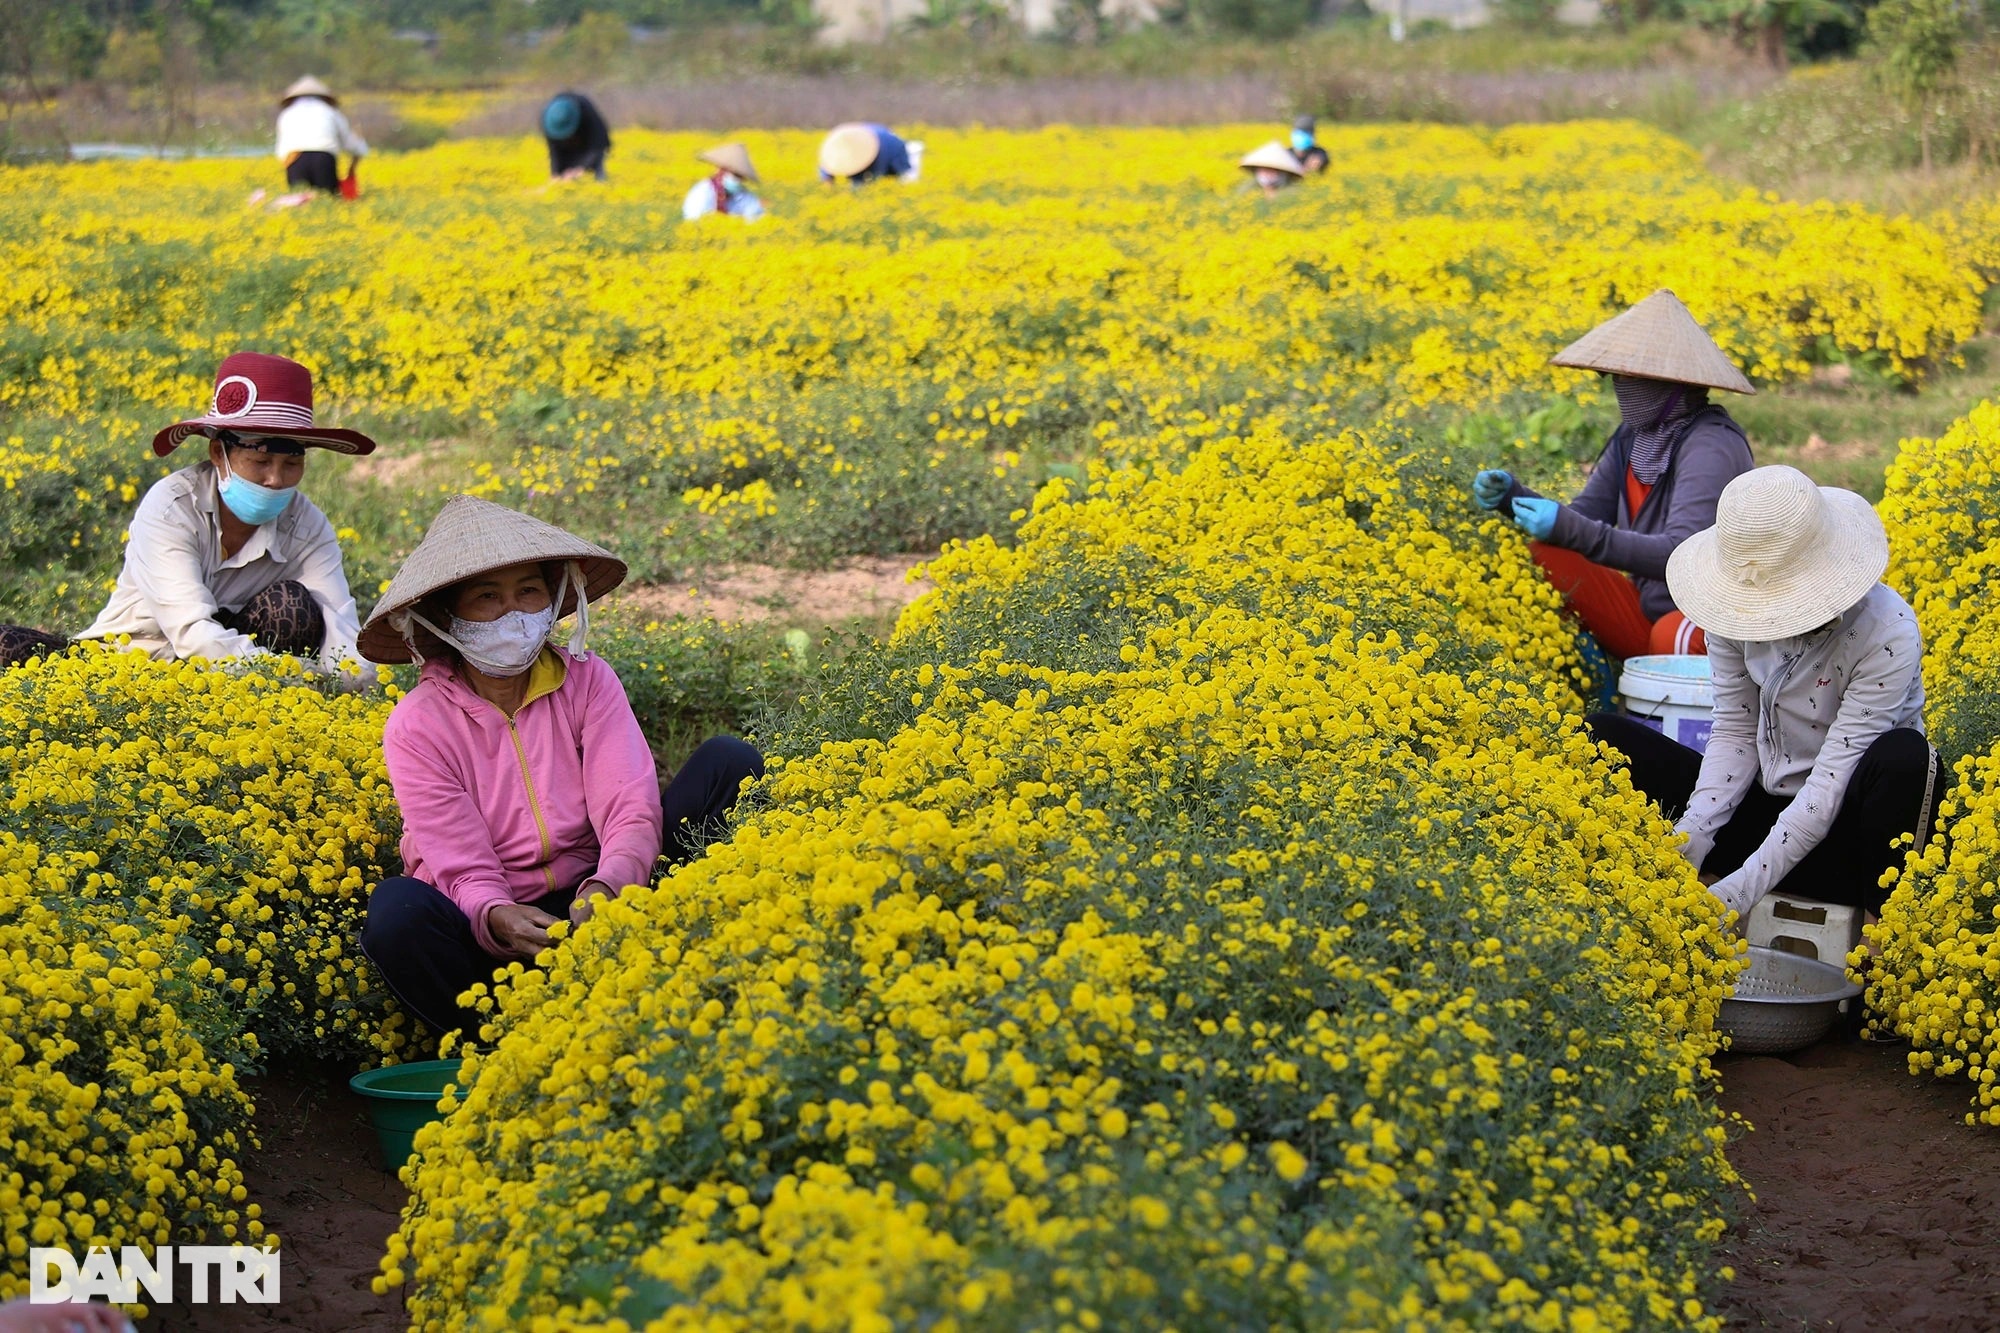 The last season of chrysanthemums is bright yellow in Nghia Trai field - 4